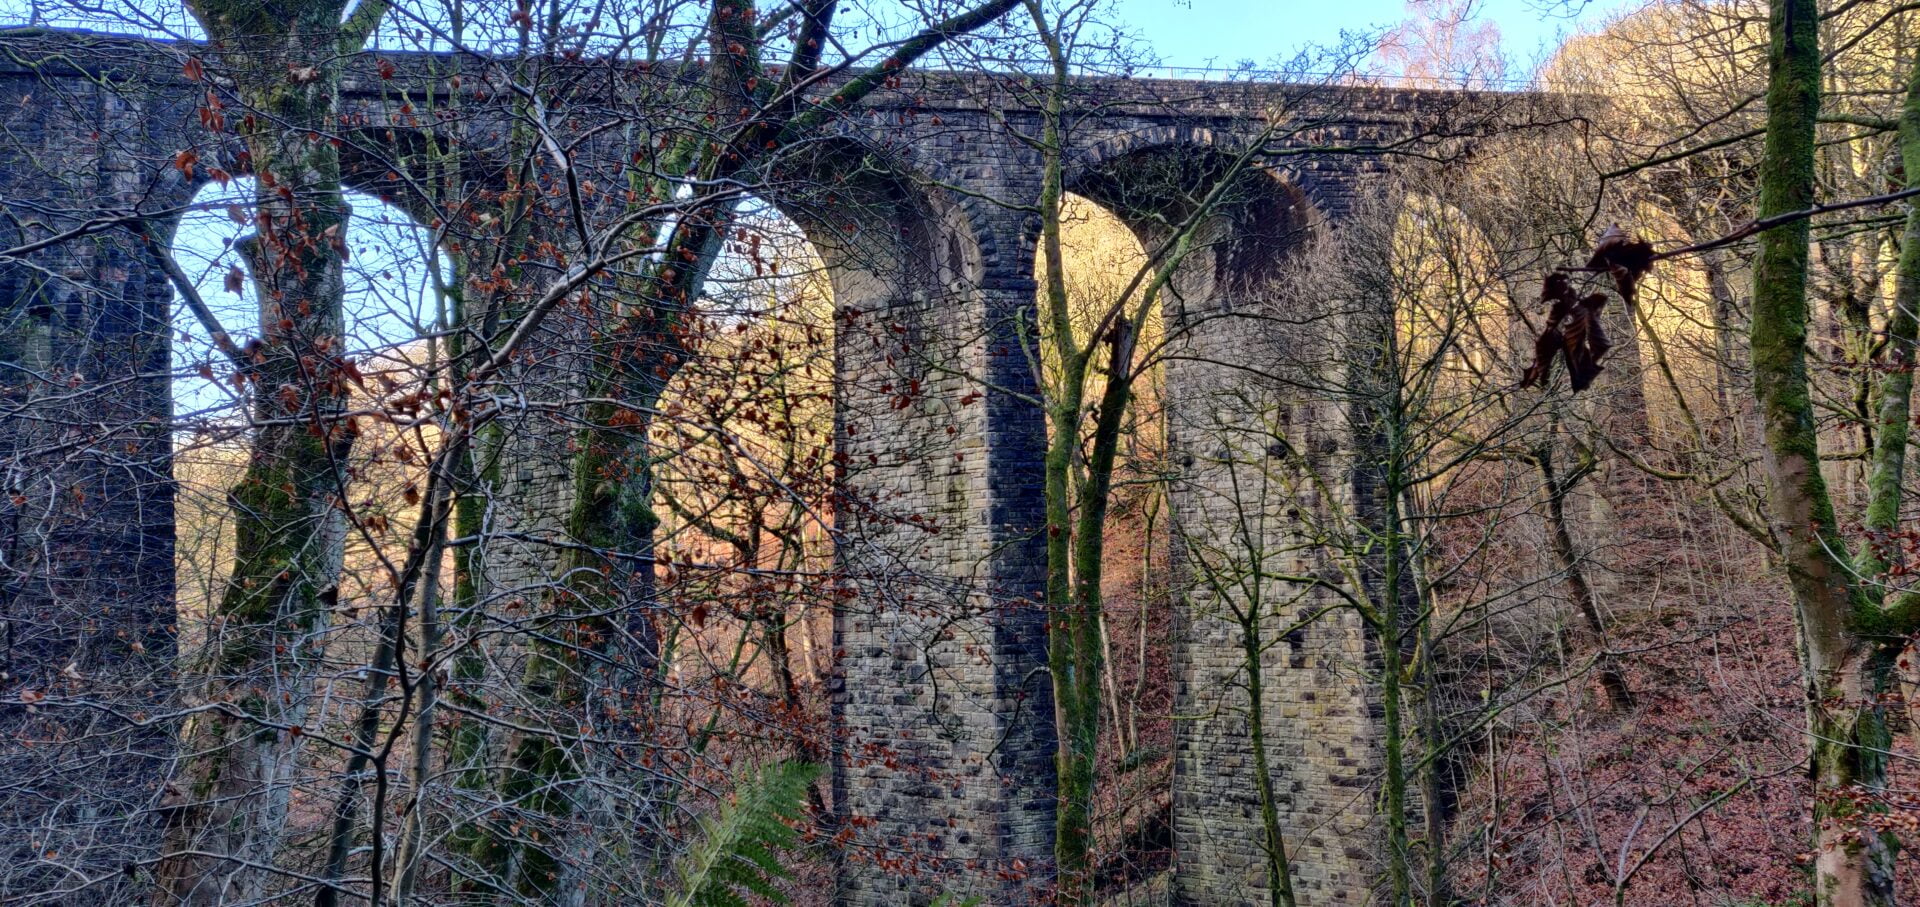 Healey Dell Nature Reserve#1 – The Viaduct › wanderscapes365